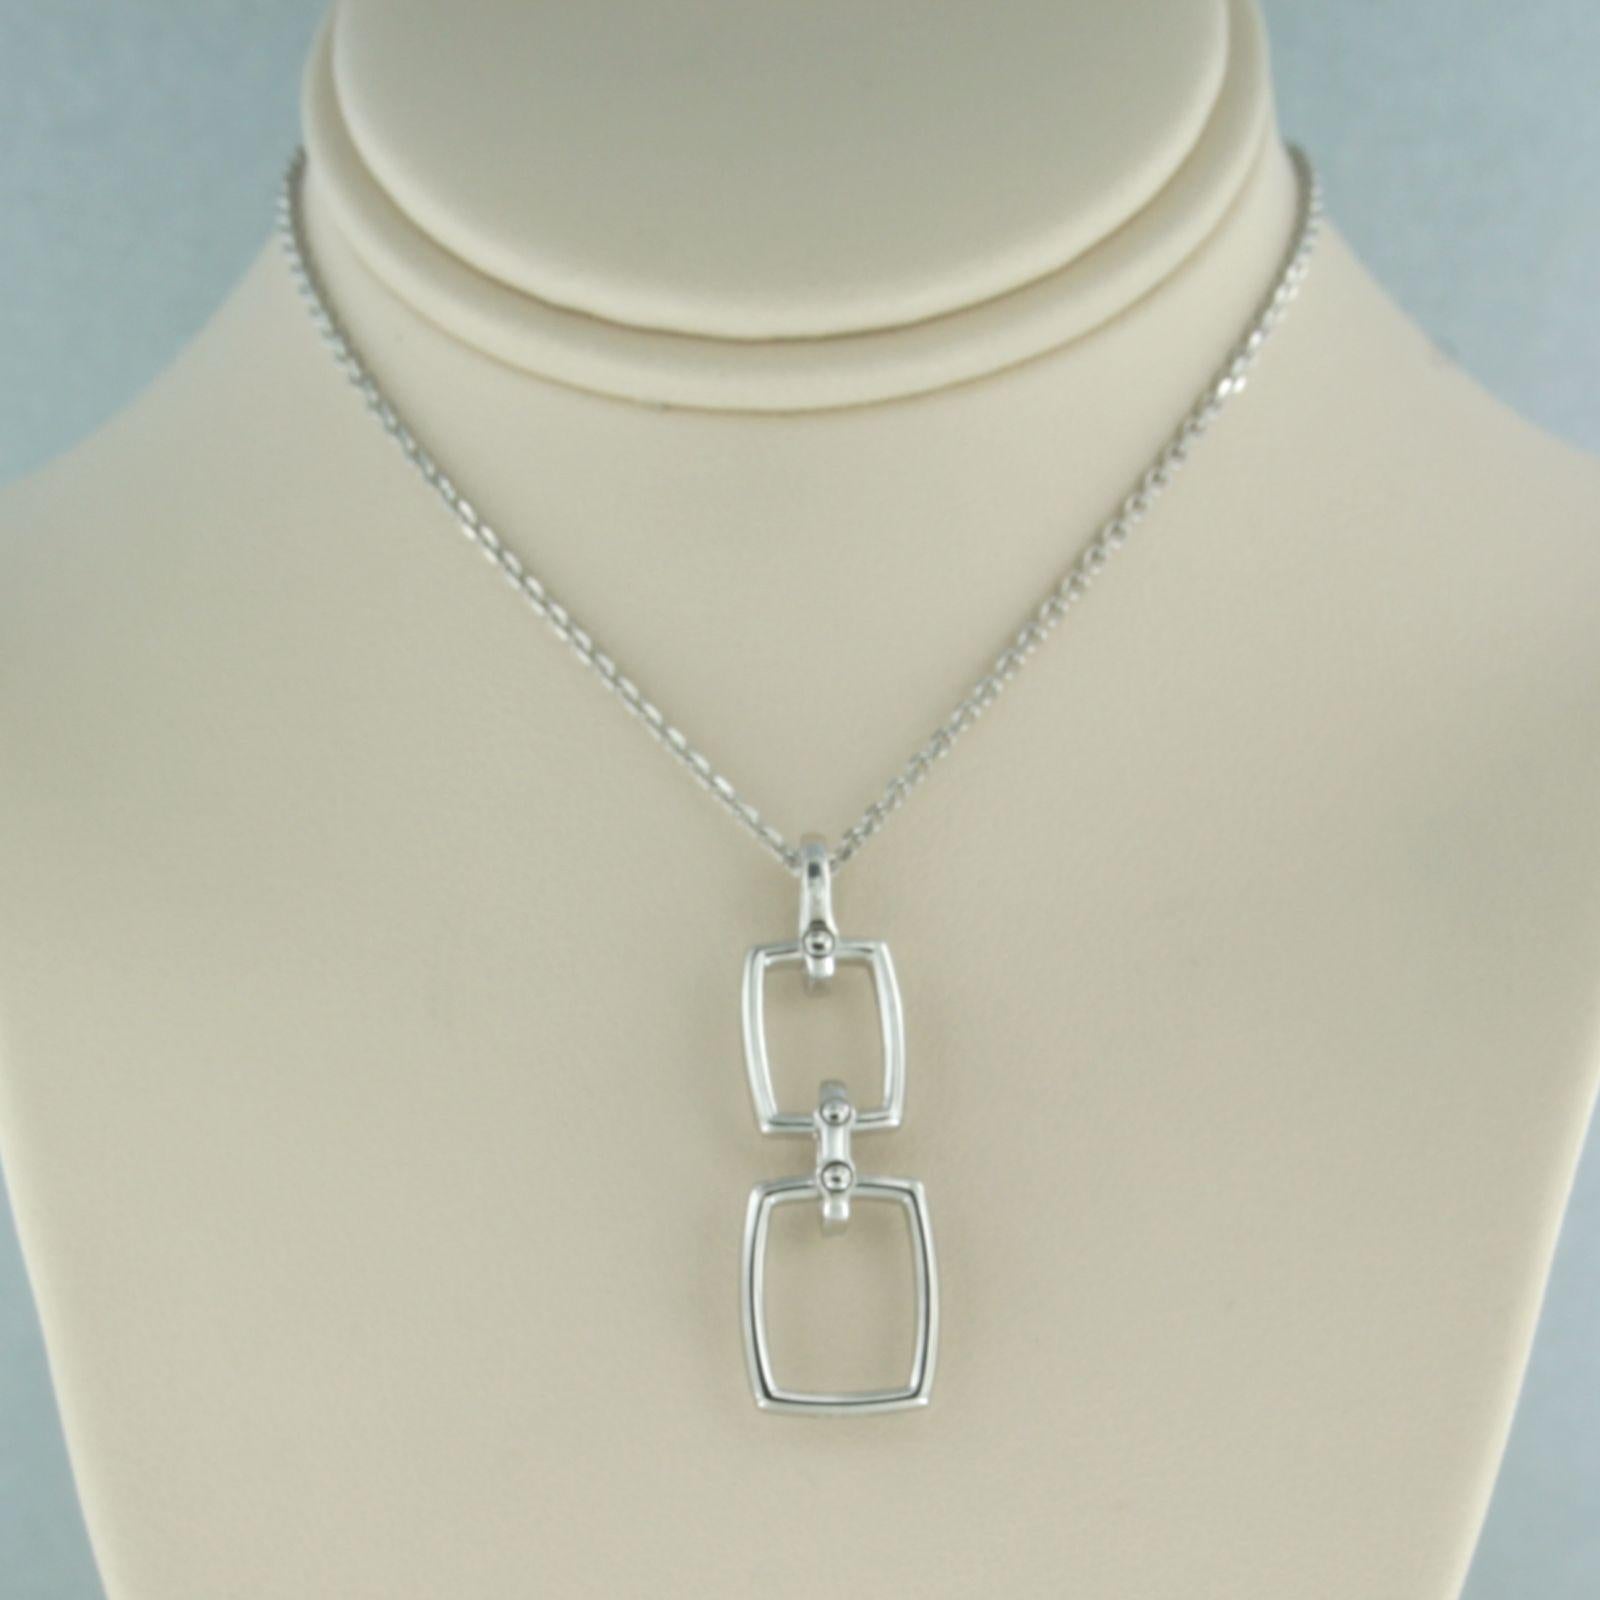 Necklace and pendant set with diamonds 18k white gold 40 cm long For Sale 1